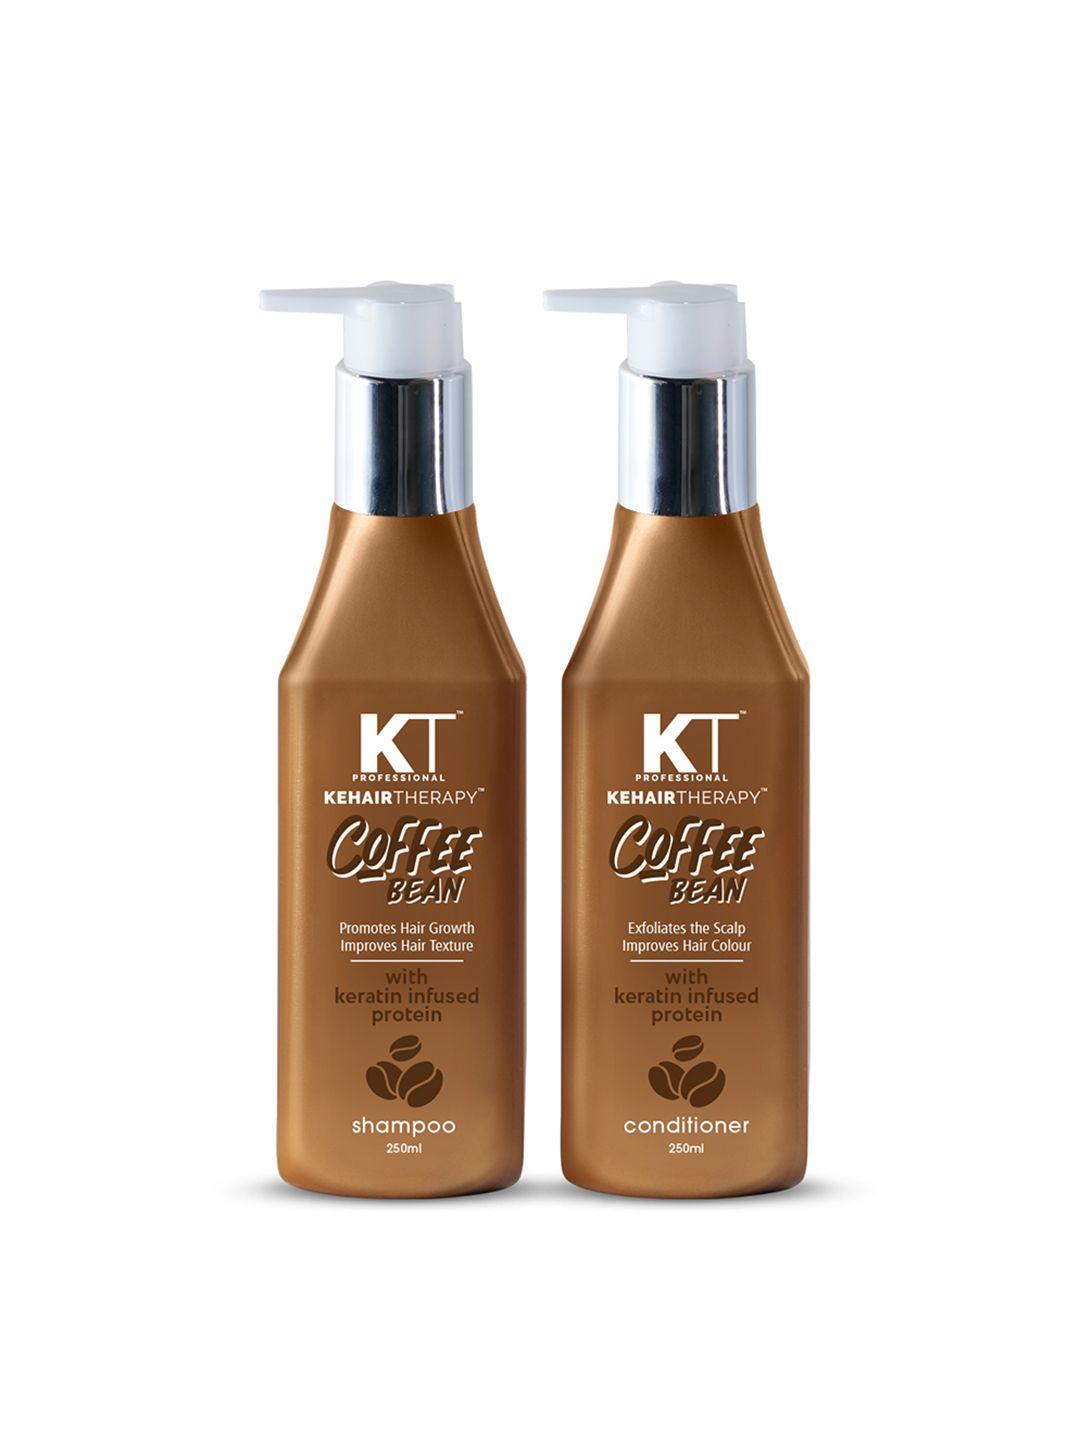 kehairtherapy kt professional coffee bean shampoo & conditioner 500 ml